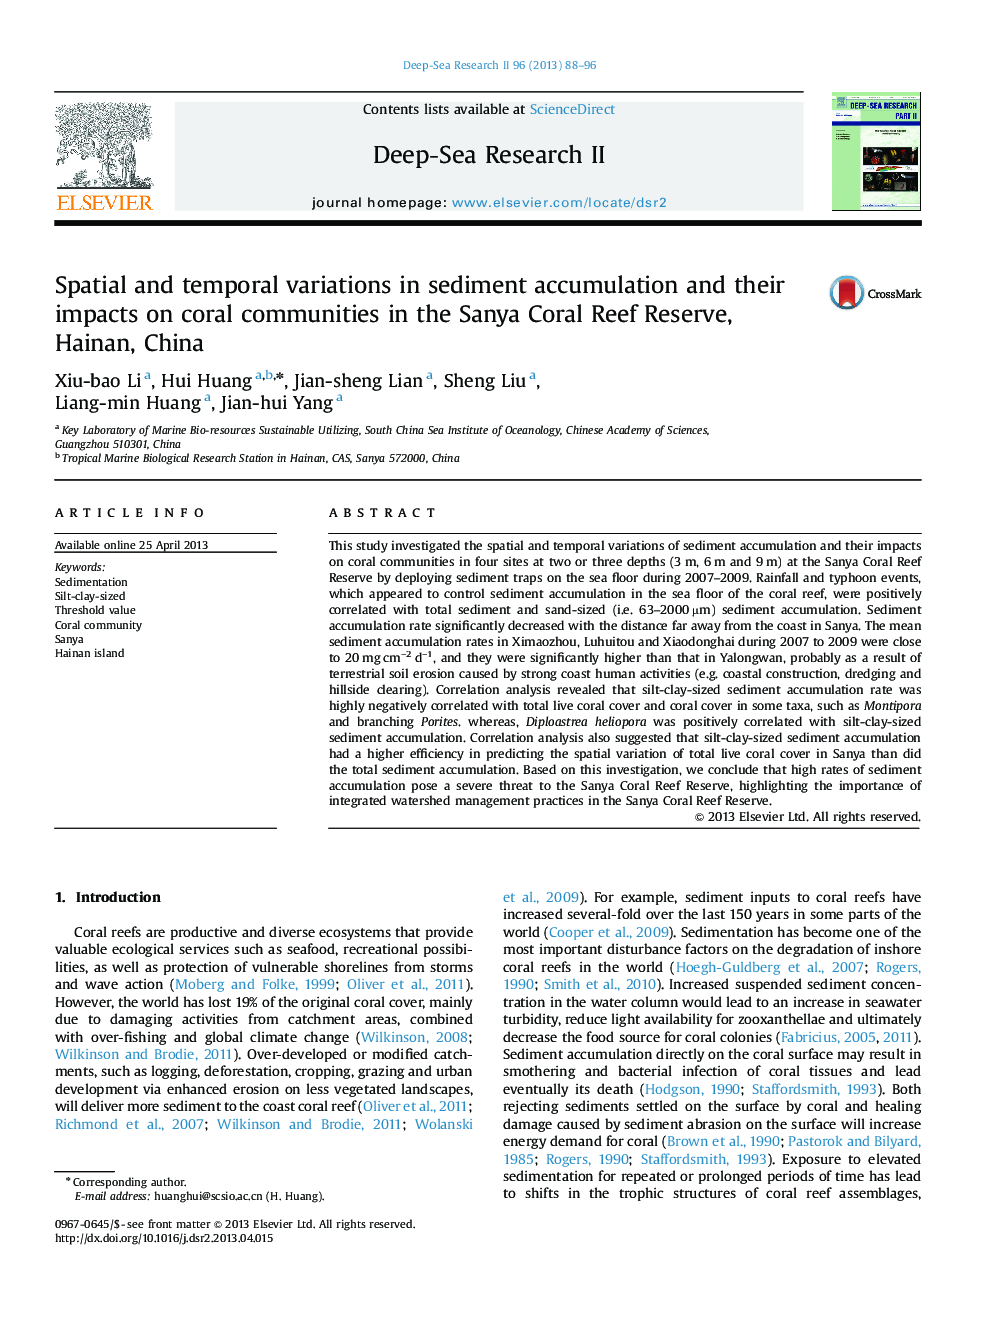 Spatial and temporal variations in sediment accumulation and their impacts on coral communities in the Sanya Coral Reef Reserve, Hainan, China